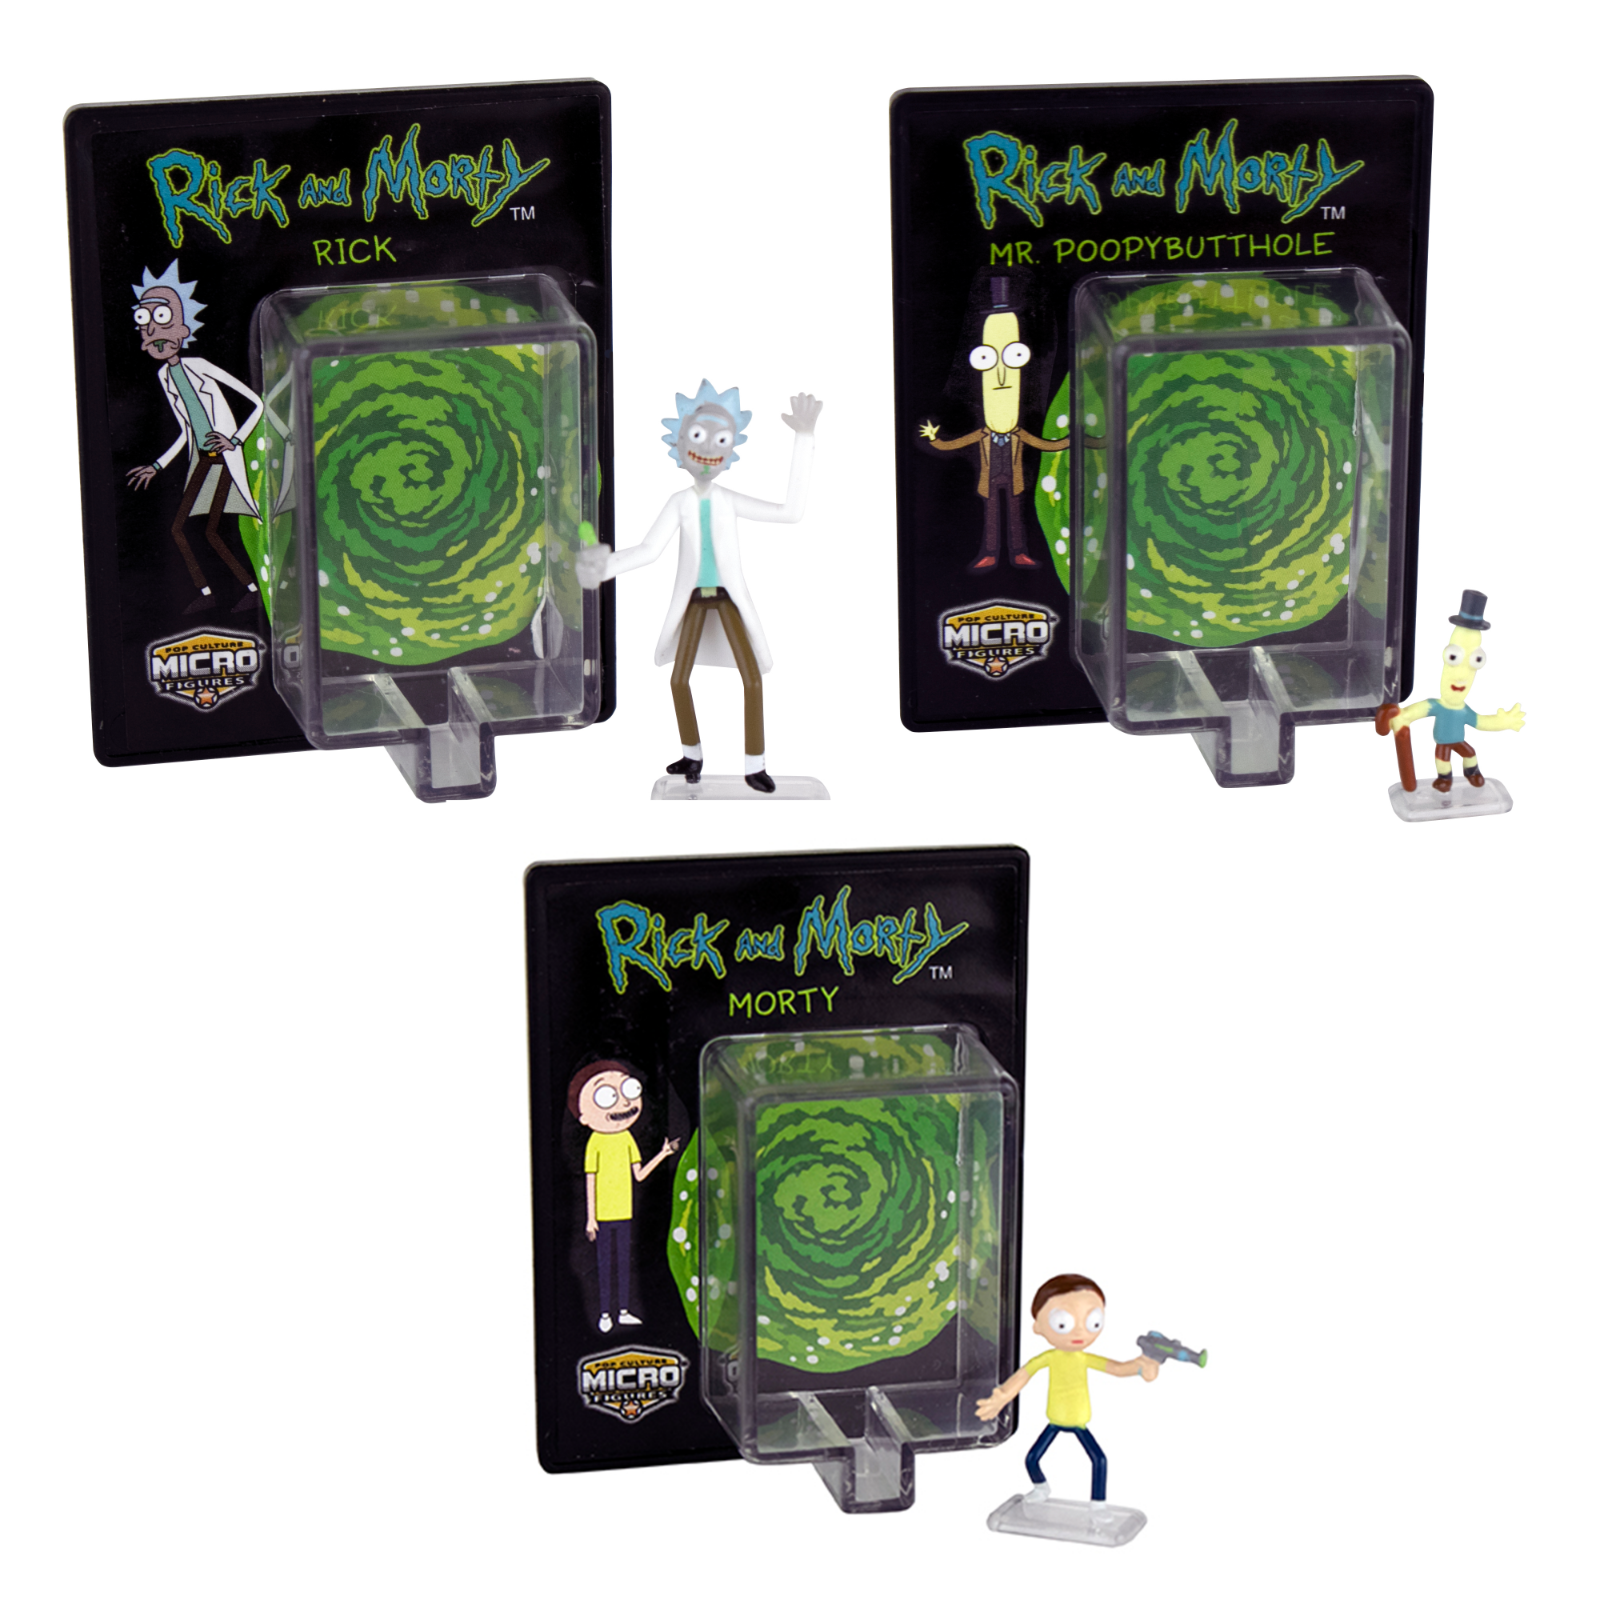 World's Smallest Rick and Morty - Rick Micro Action Figure